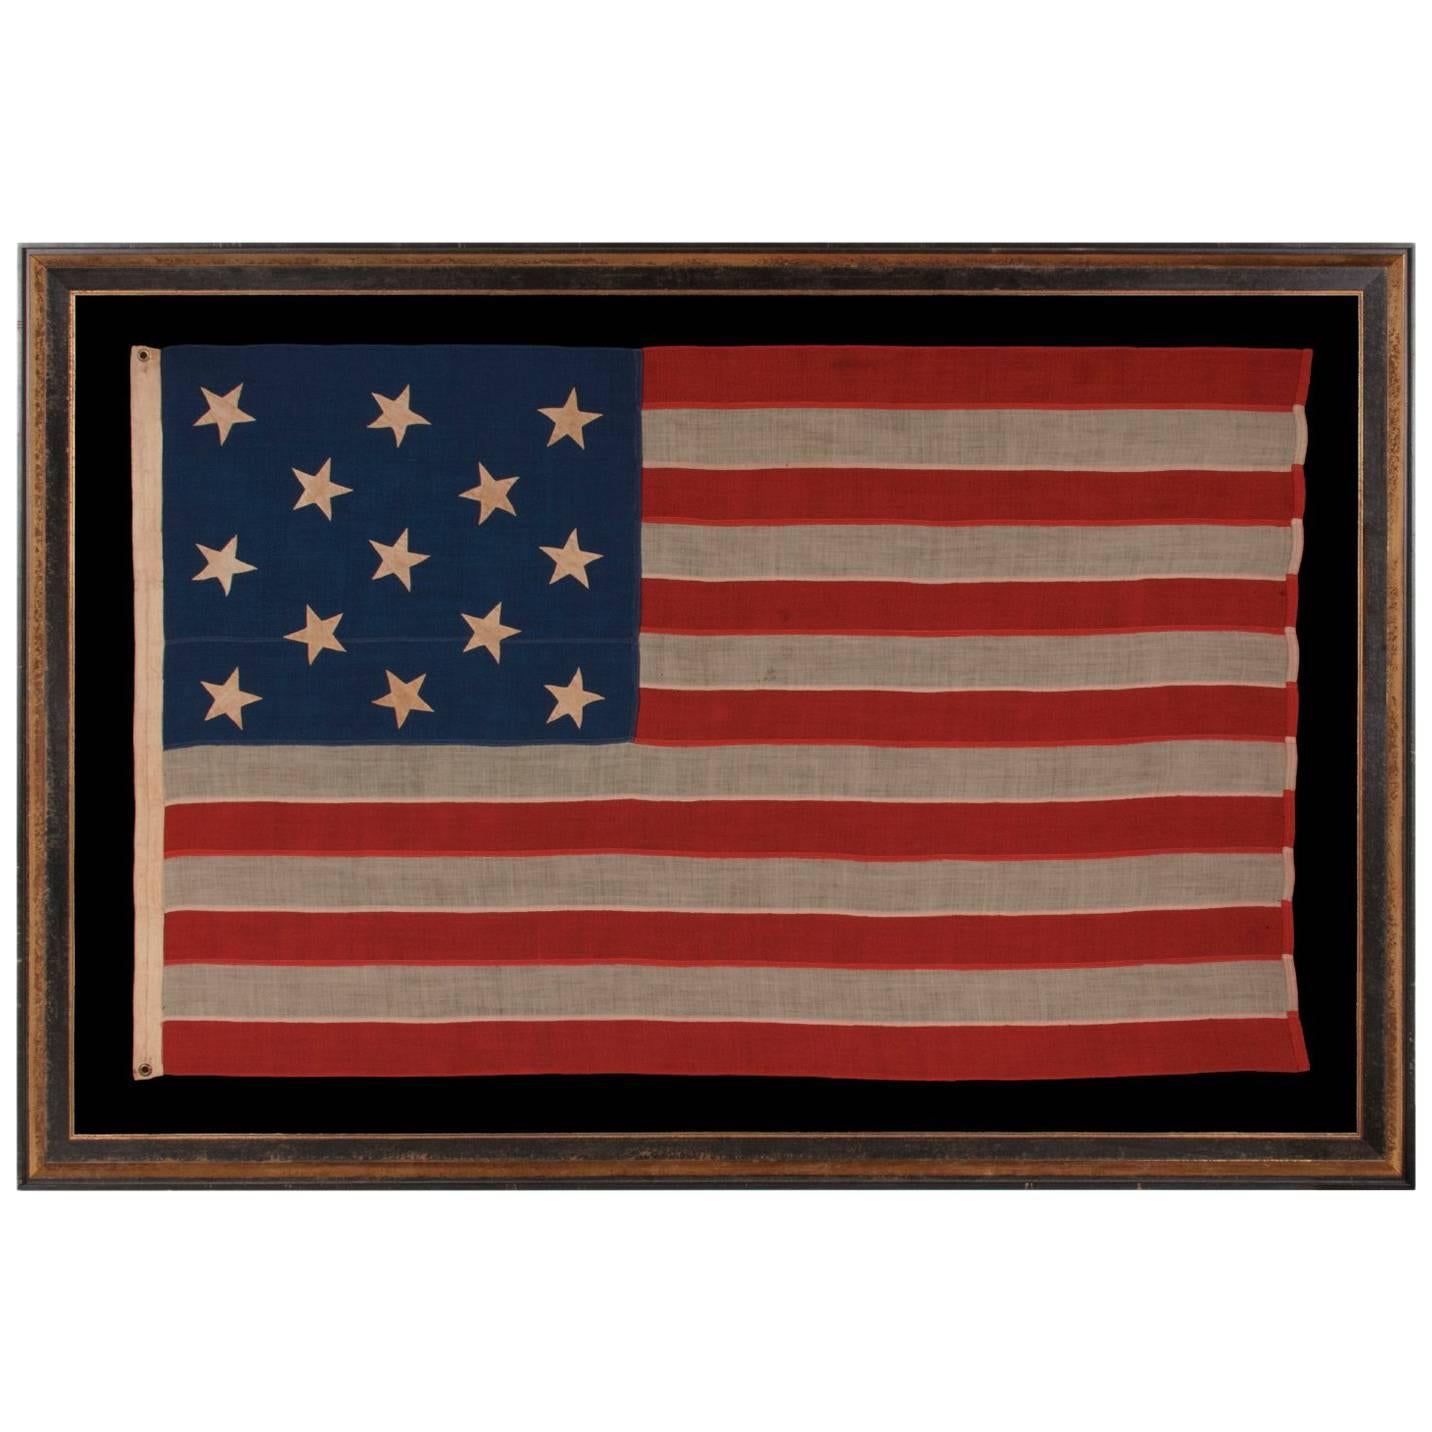 13 Stars Hand-Sewn Antique American Flag, with Stars in a 3-2-3-2-3 Pattern